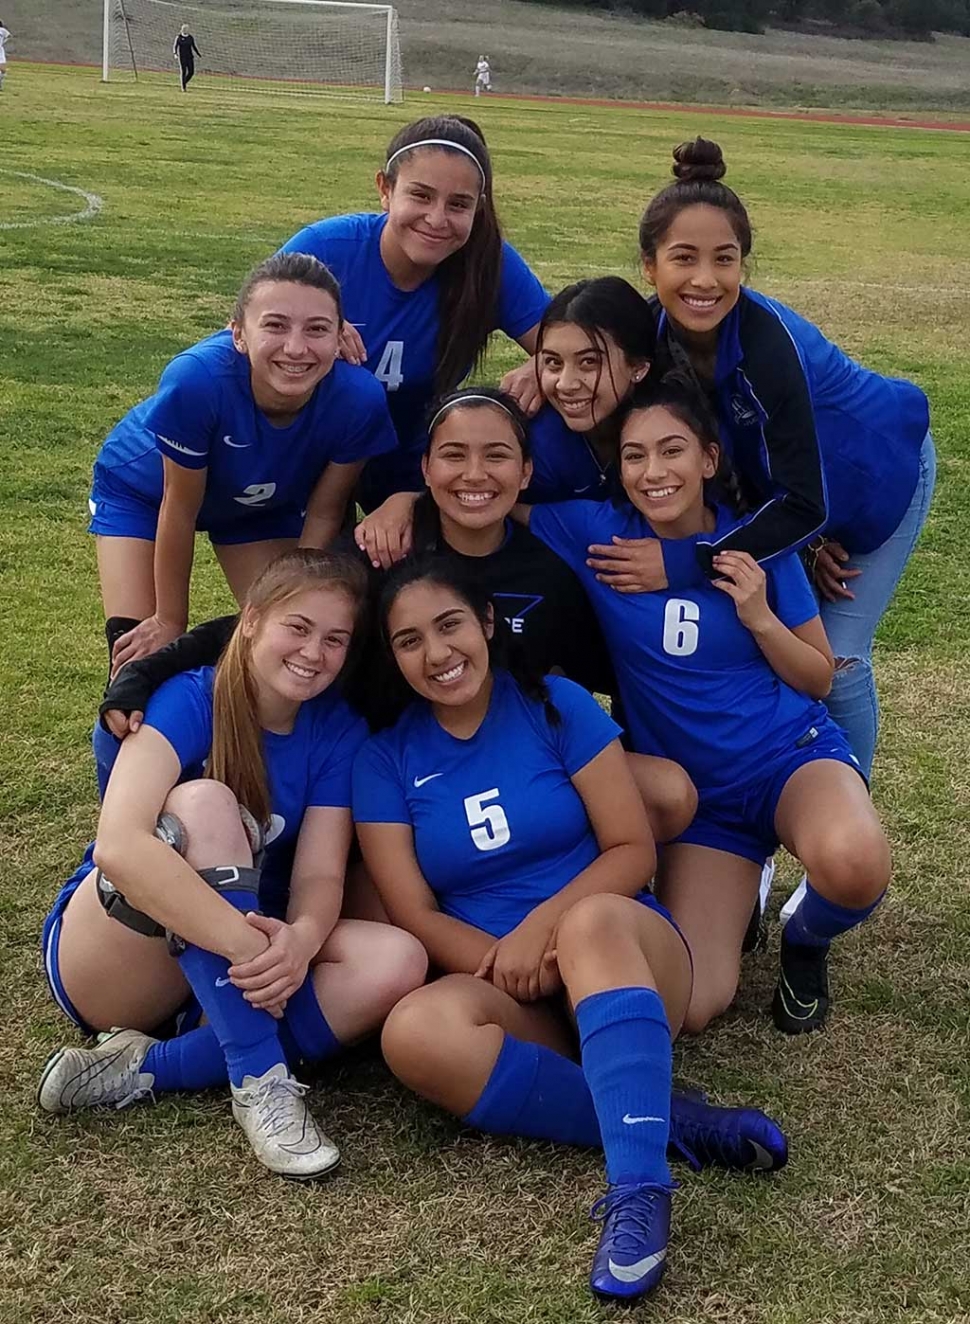 (Above) The Fillmore Girls Soccer Frosh Team as they smile for a picture after defeating Carpinteria 4 – 0 this past Monday. Photos courtesy Coach Omero Martinez. Saturday, January 27th Fillmore Flashes traveled to Nordhoff. Fillmore’s JV defeated Nordoff 2 – 0. Flashes Varsity fell short to Nordhoff 1 -0 in overtime. Monday, January 29th Fillmore hosted Carpinteria. Flashes Frosh came out strong and set the tone for the rest of the team's. They dominated with a 4 - 0 victory. Goals were scored by Nicole Gonzalez, Yanely Lara and Vanessa Avila. JV defeated Carpinteria 2 – 0. Goals were scored by Luita Bravo. Flashes Varsity’s Ana Covarrubias had 2 goals 1 assist. Valerie Hernandez had 1 goal 2 assist. Andrea Marruffo and Lupita Ruvalcaba had one goal each.  Kayla Martinez, Yareli Cobian, Emily Garibay and Sophia Garibay played well defensively. They only allowed 4 shots on goal. Tuesday, January 30th Flashes Varsity traveled to Villanova and won 10-2. Goals were scored by Ana Covarrubias, Anahi Andrade, Valerie Hernandez, Andrea Marruffo (2) Lupita Bravo (2), Tori Villegas, Lupita, Cruz and Susie Garcia. Come out and cheer on the Lady Flashes on Wednesday 2-7-18 as they take on Cate. JV begins 4:30pm, Varsity 6:00pm. Submitted By Coach Omero Martinez.